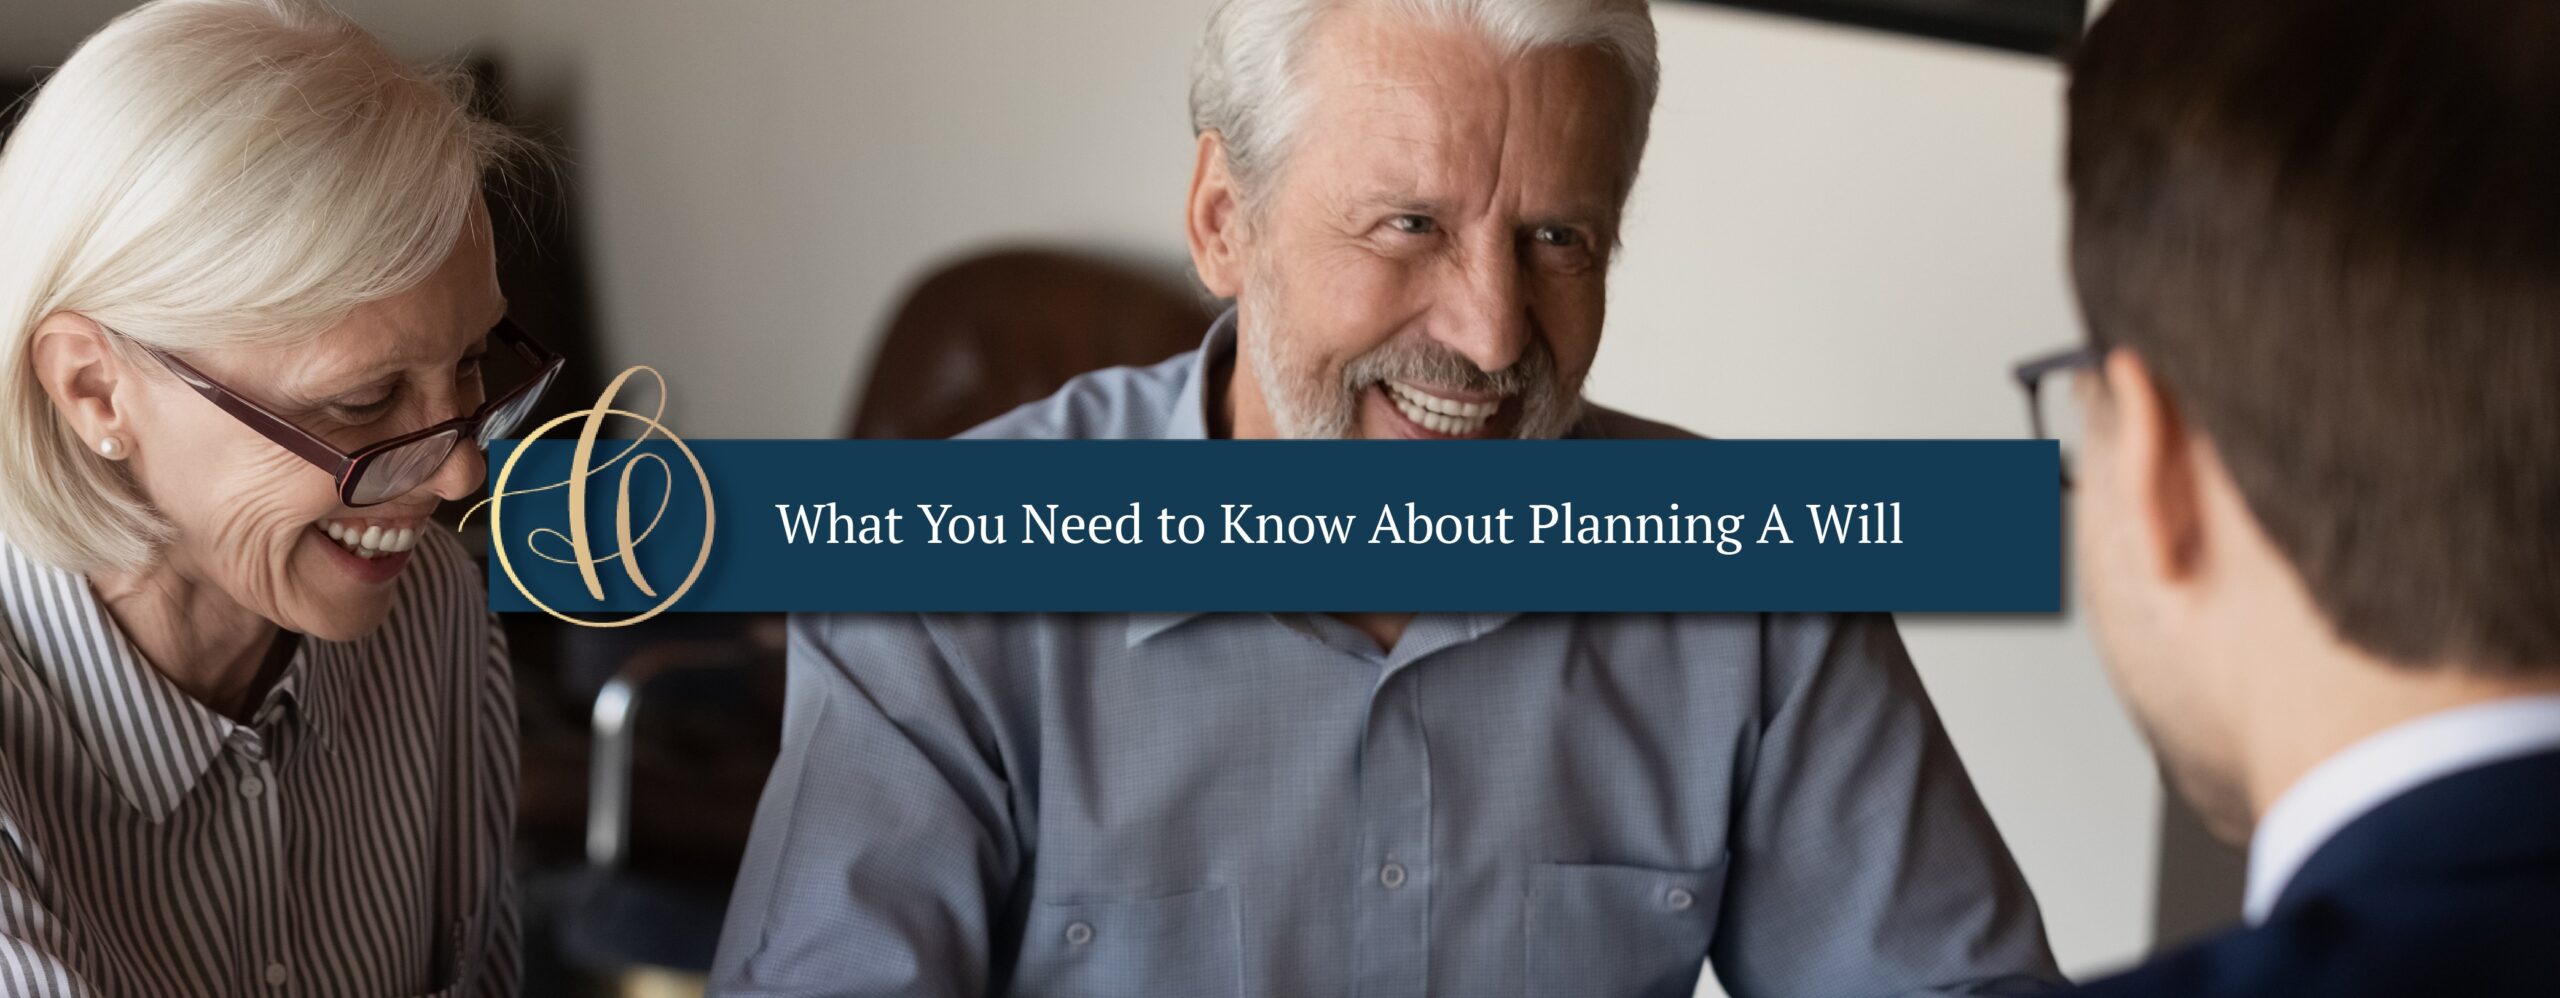 Protect Your Legacy: What You Need to Know About Planning A Will